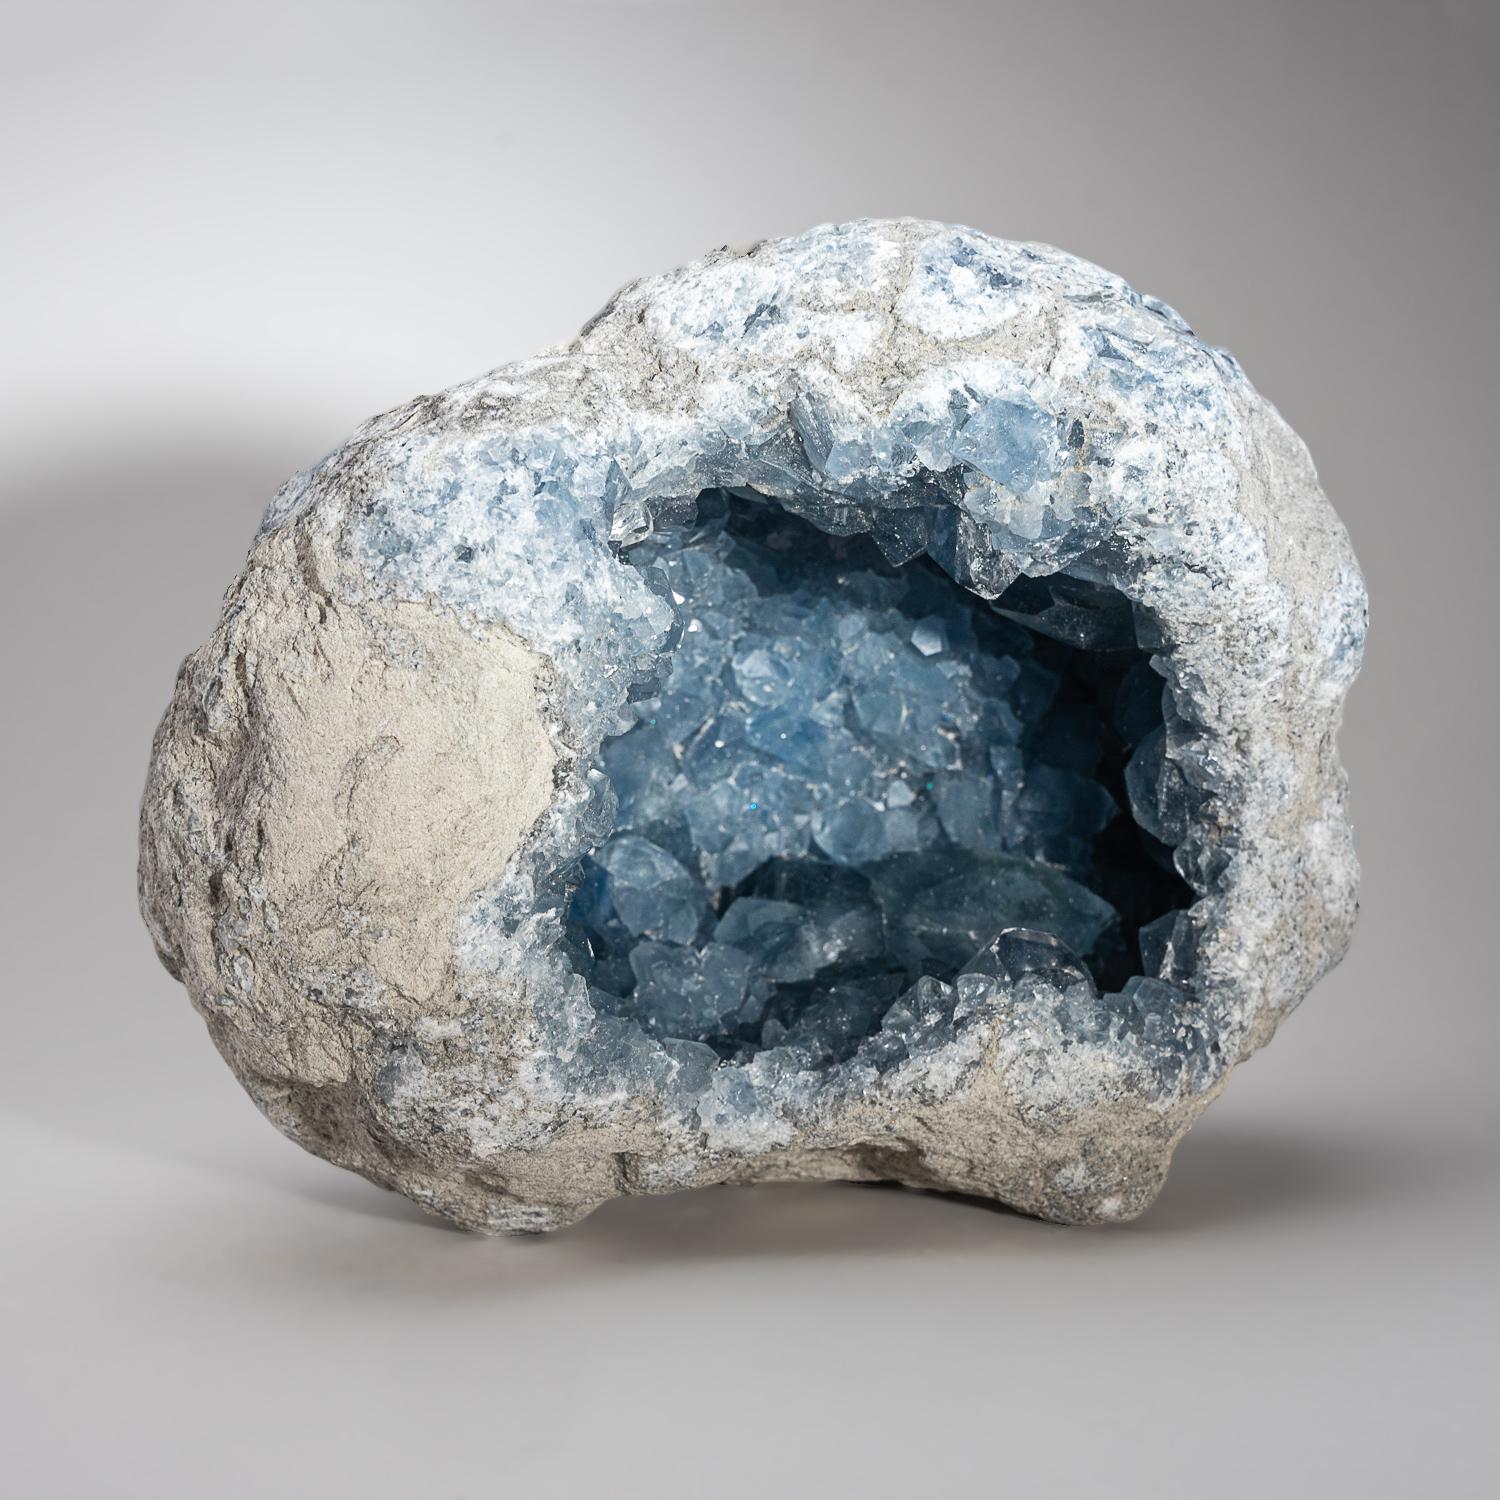 Lustrous large gem transparent crystals of blue Celestite. Has a few large crystals with prism faces and chisel-shaped terminations. This specimen has bright rich color, unlike the blueish grey color which is common from this region. All fully